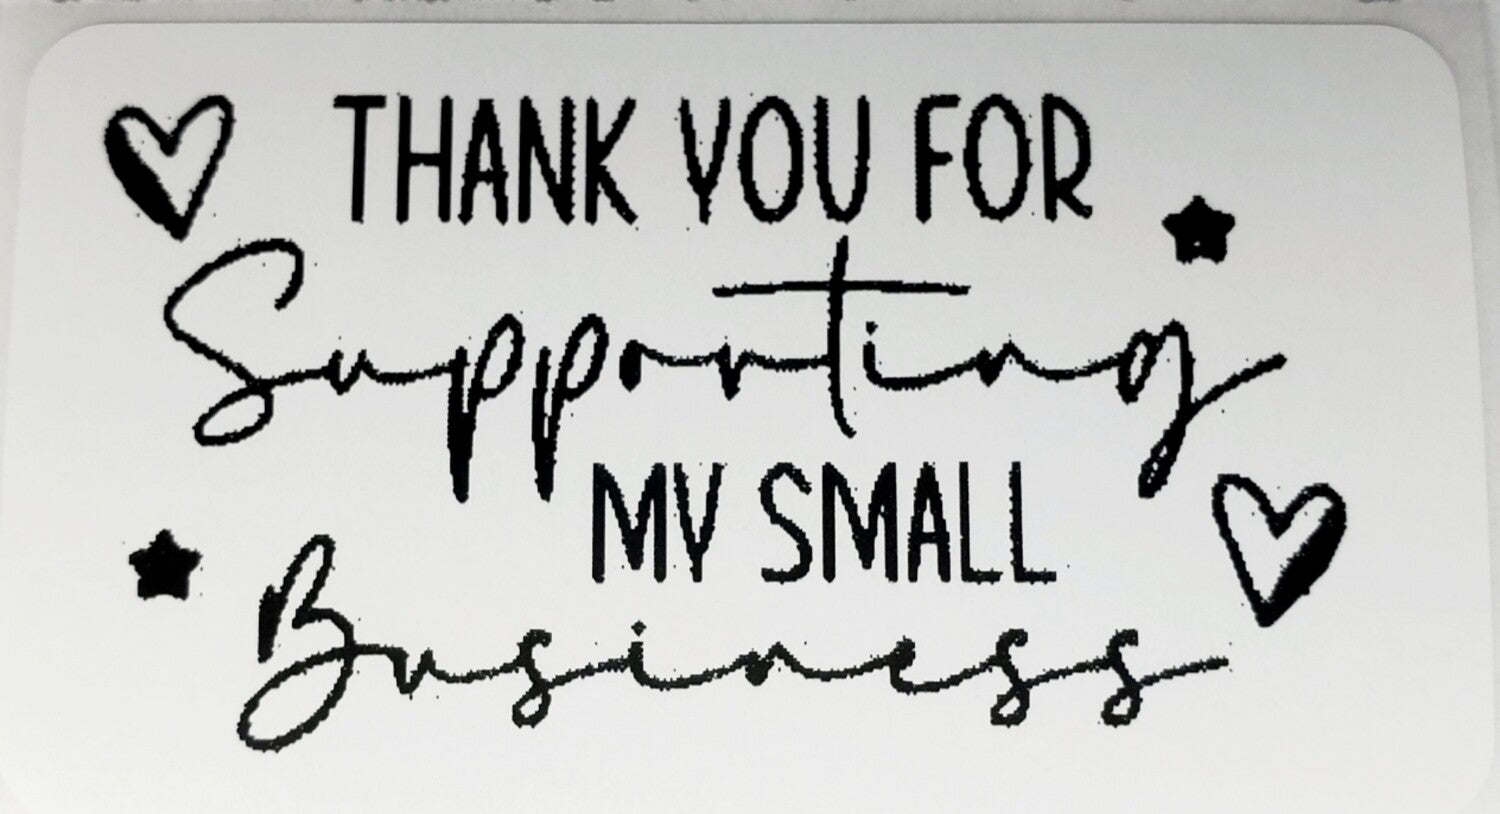 Thank You for Supporting My Small Business Stickers